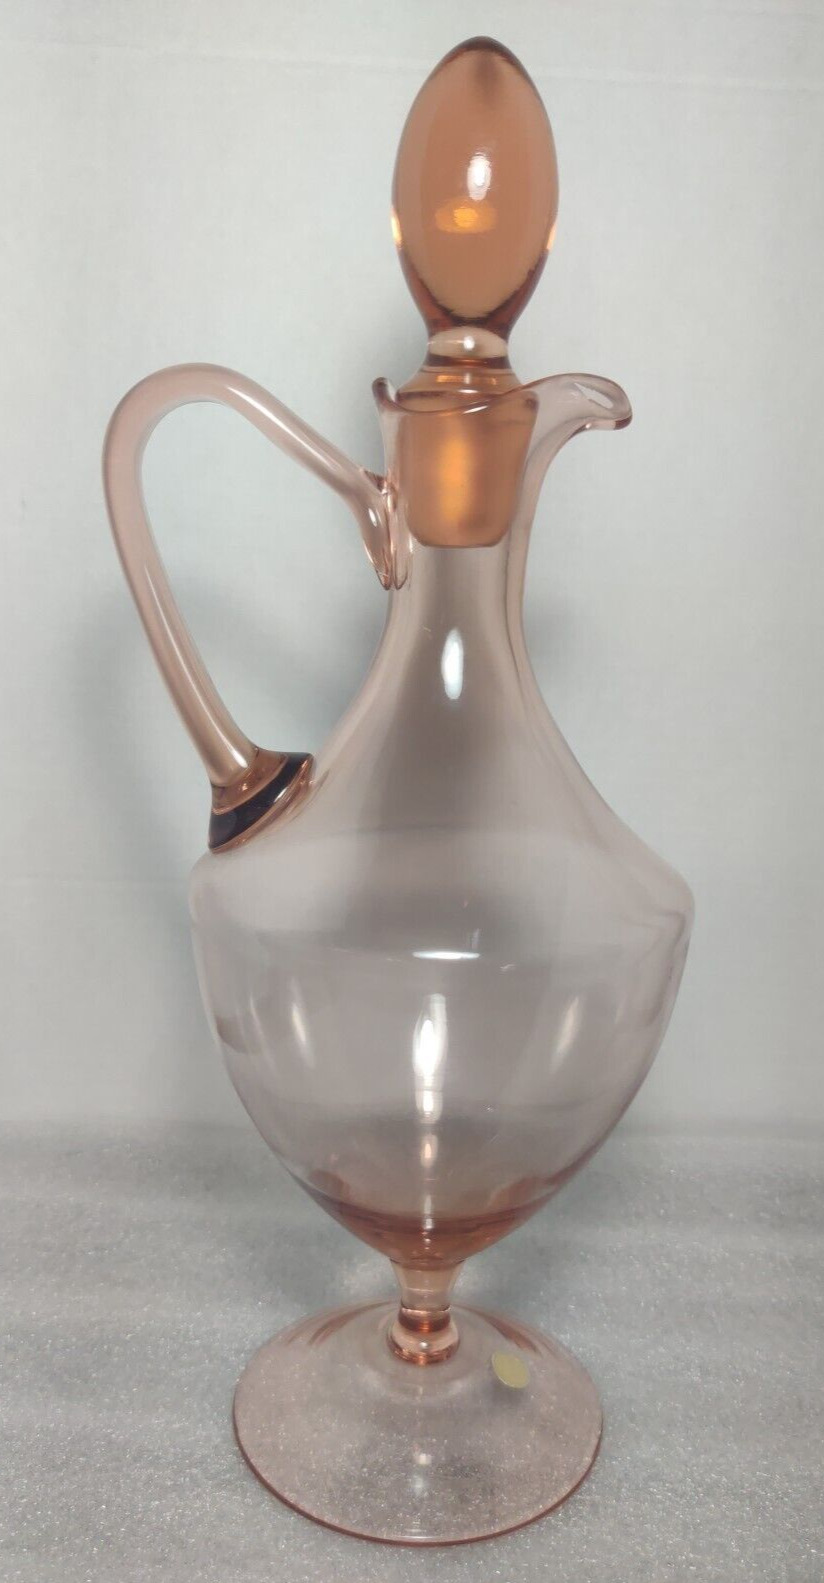 VTG MCM Pink Glass Decanter w/ Stopper, Roumania